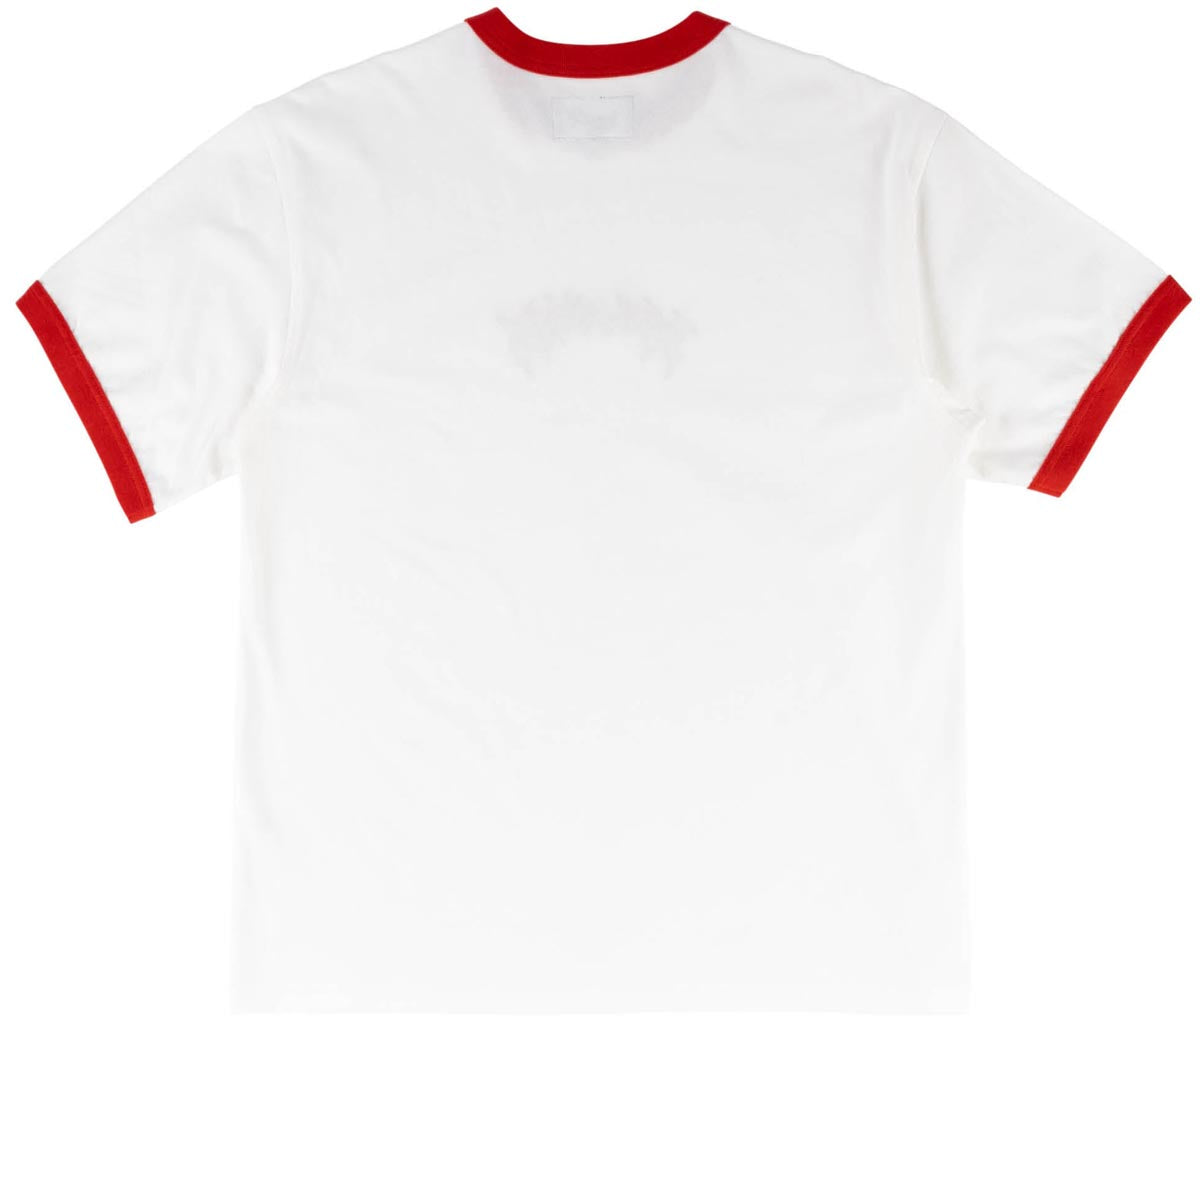 Welcome Barb Ringer T-Shirt - White/Red image 5